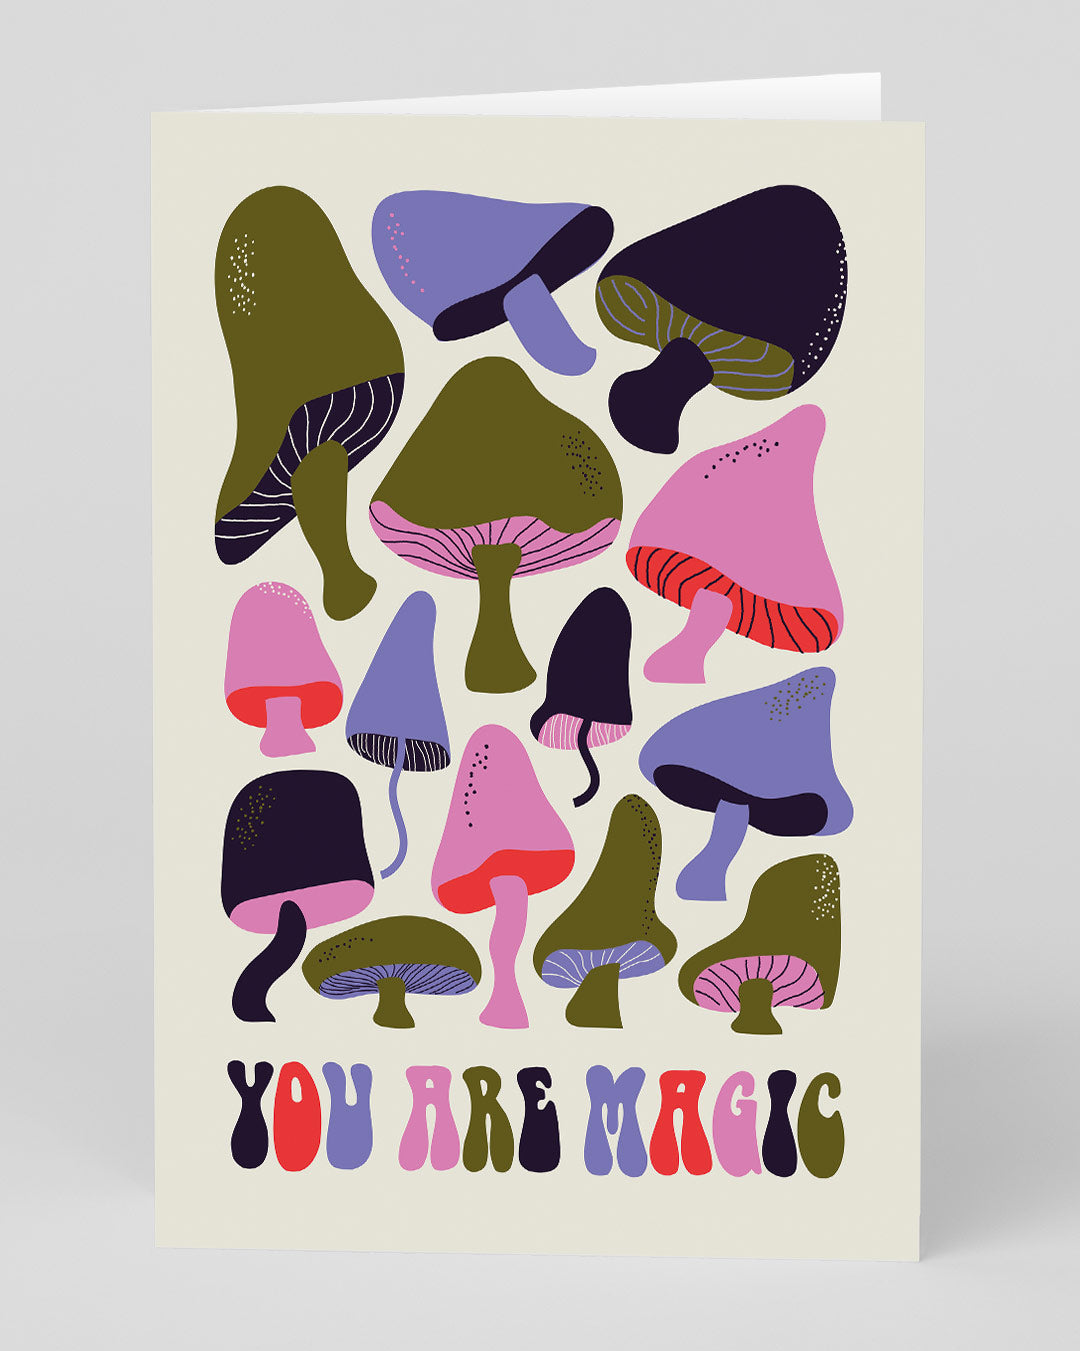 Valentine’s Day | Cute Valentines Card For Him or Her | Personalised Magic Mushrooms Card | Ohh Deer Unique Valentine’s Card | Made In The UK, Eco-Friendly Materials, Plastic Free Packaging